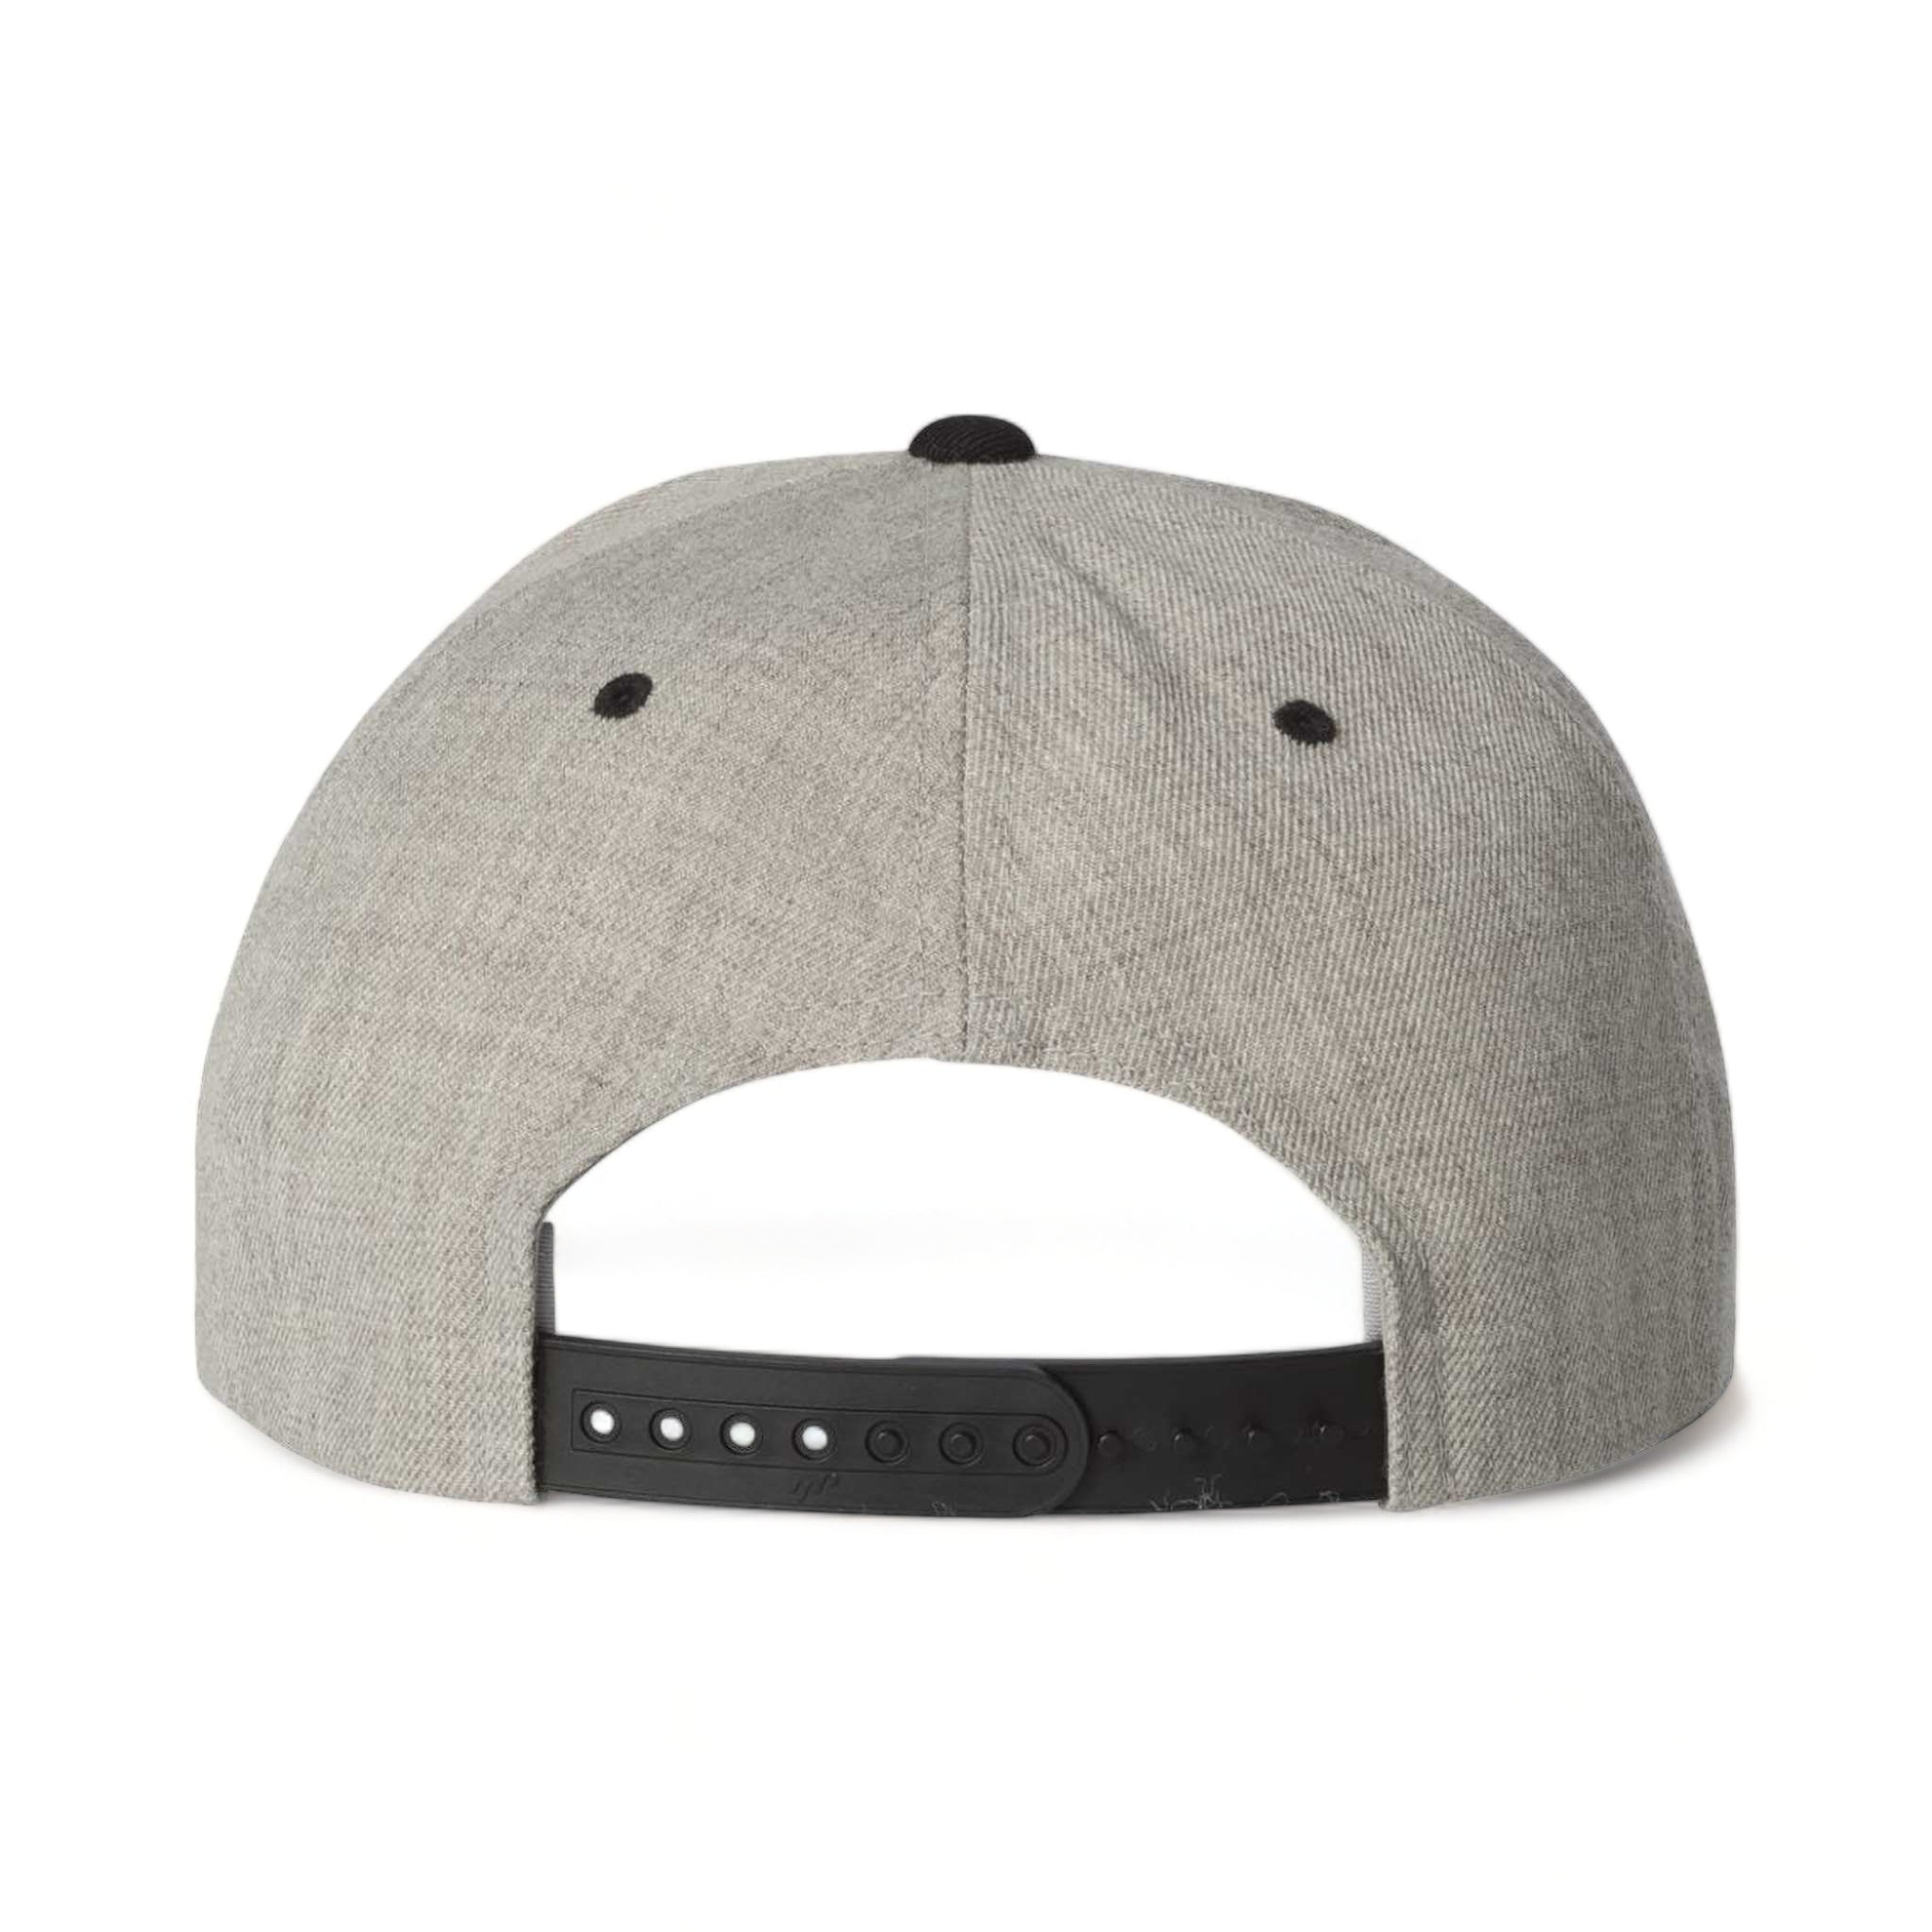 Back view of YP Classics 6089M custom hat in heather and black